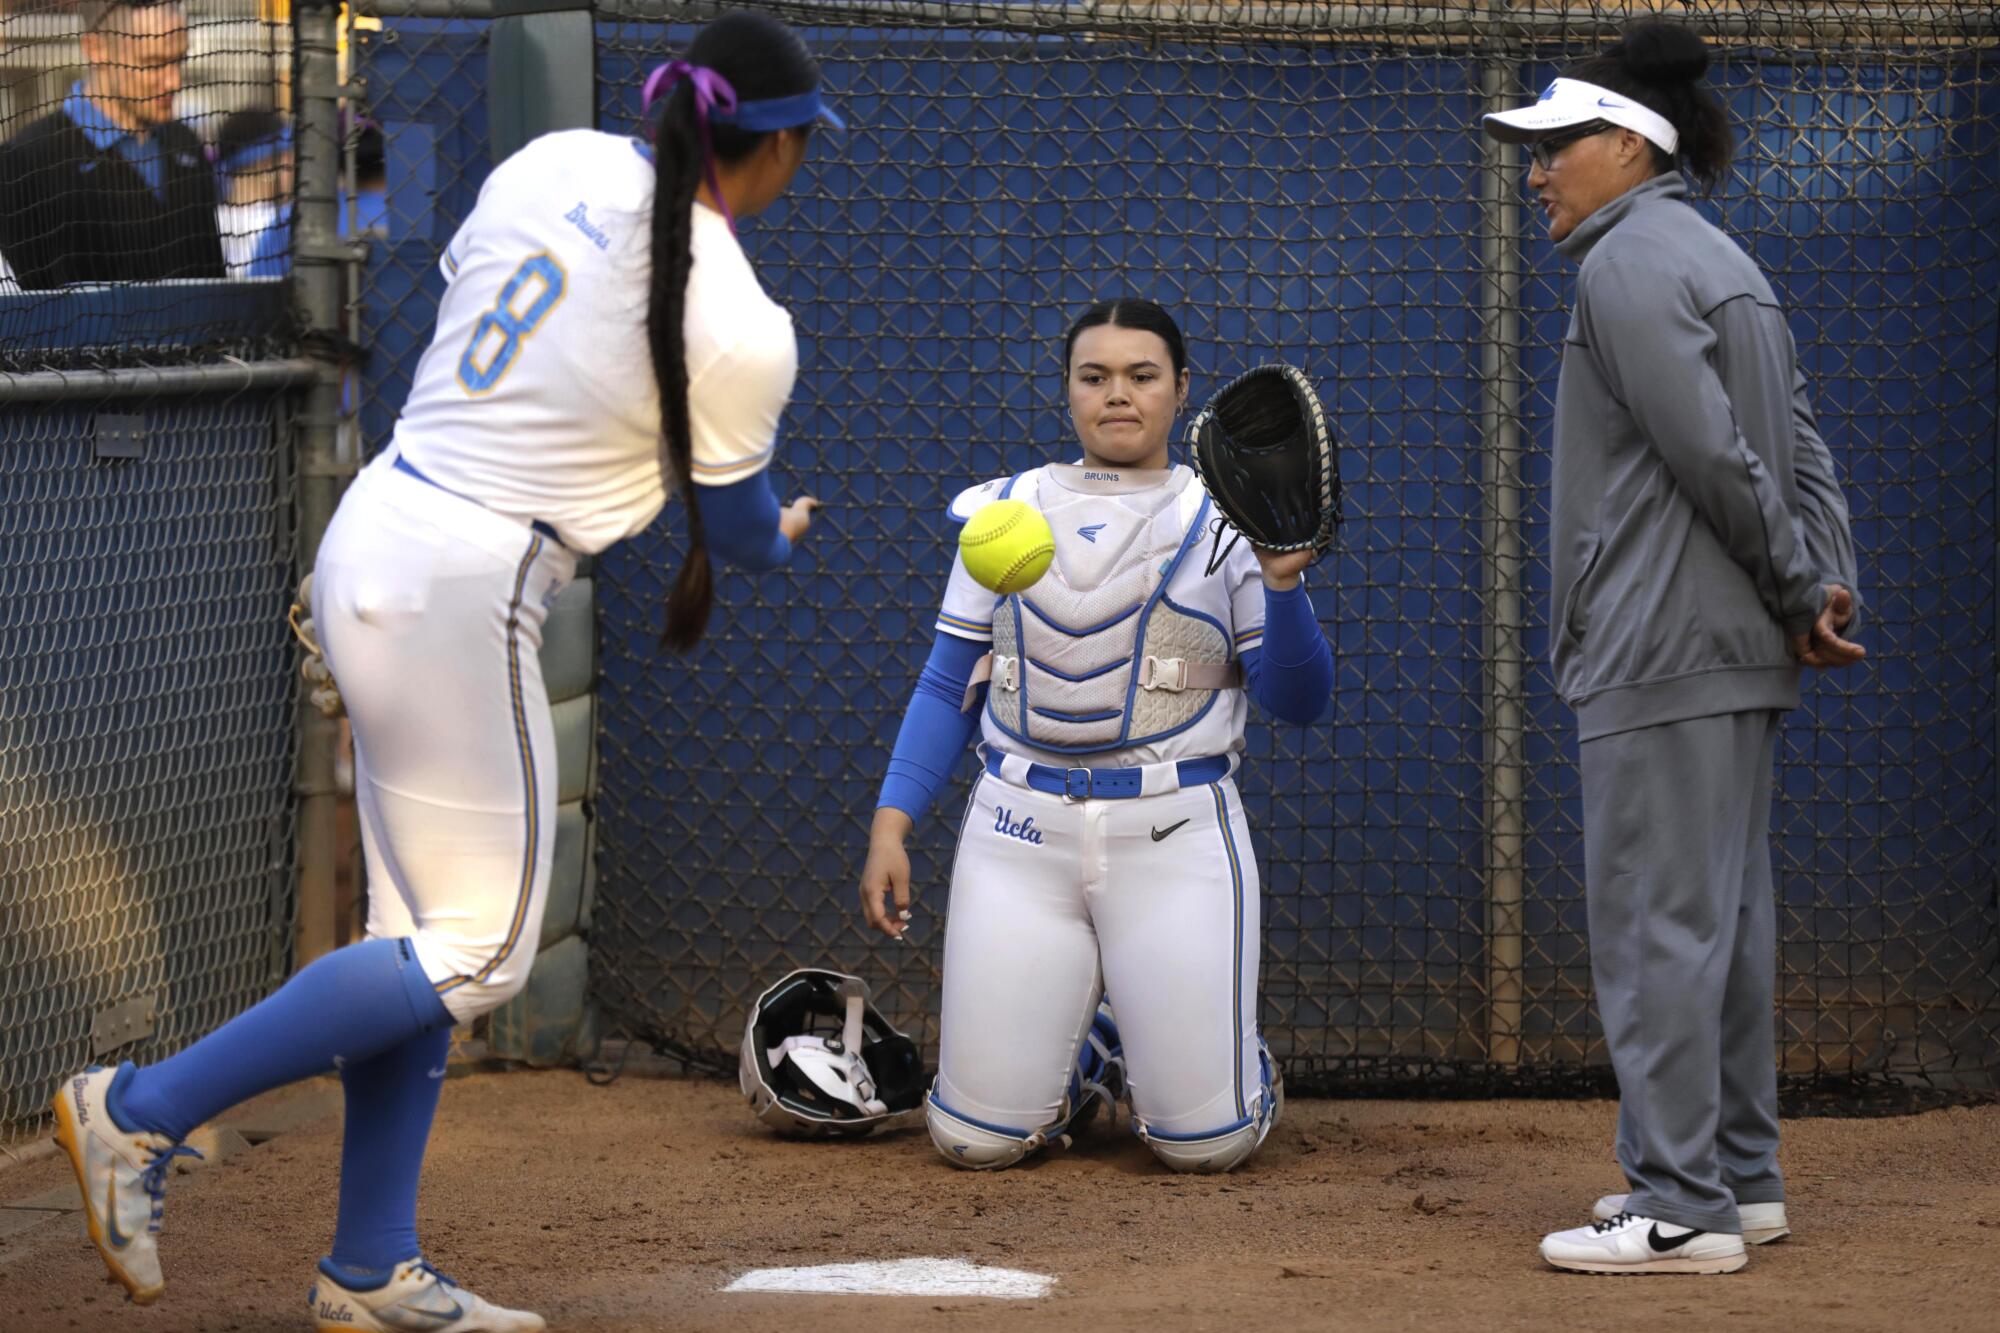 UCLA pitcher Megan Faraimo warms up with catcher Taylor Sullivan as pitching coach Lisa Fernandez observes in the bullpen